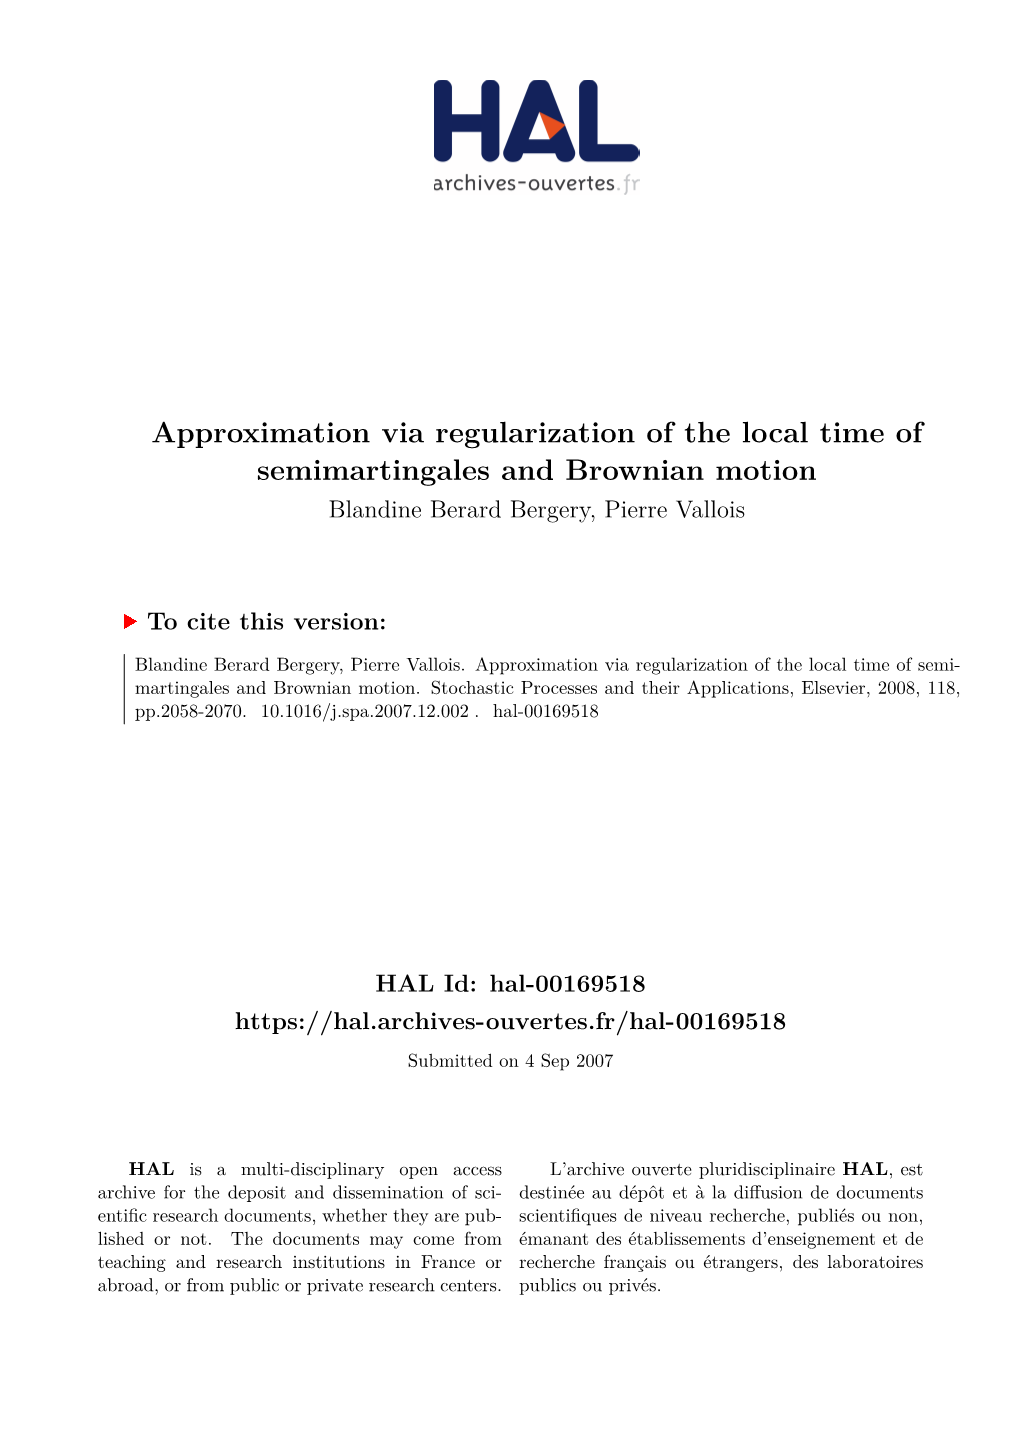 Approximation Via Regularization of the Local Time of Semimartingales and Brownian Motion Blandine Berard Bergery, Pierre Vallois